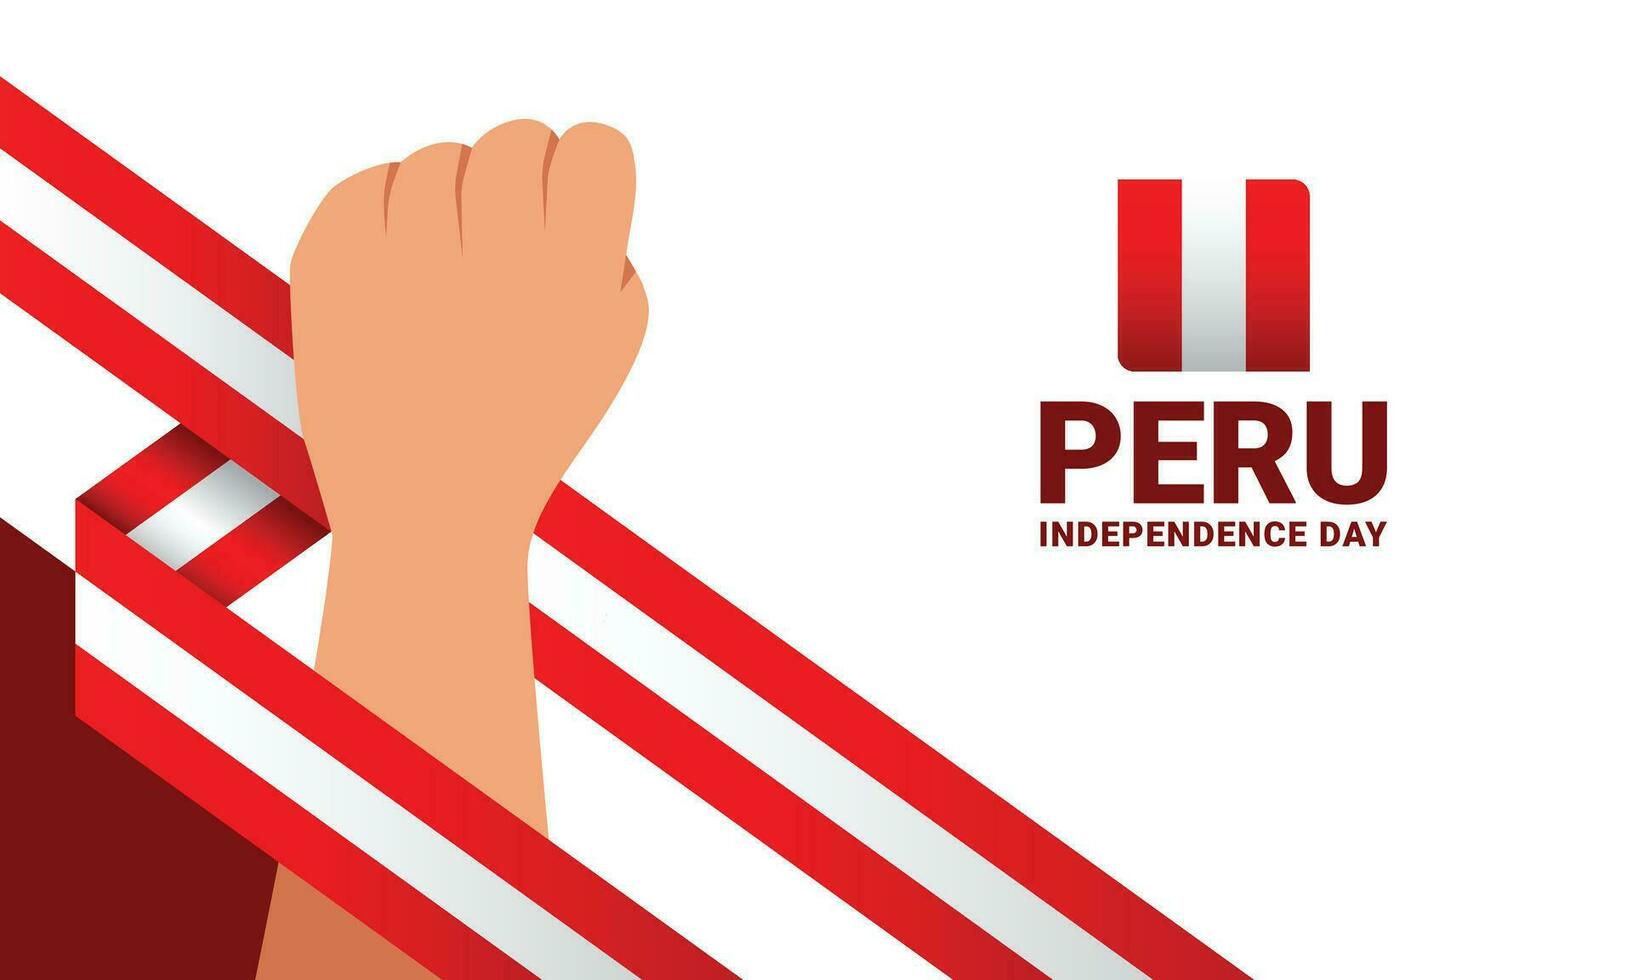 Peru Independence day event celebrate background vector